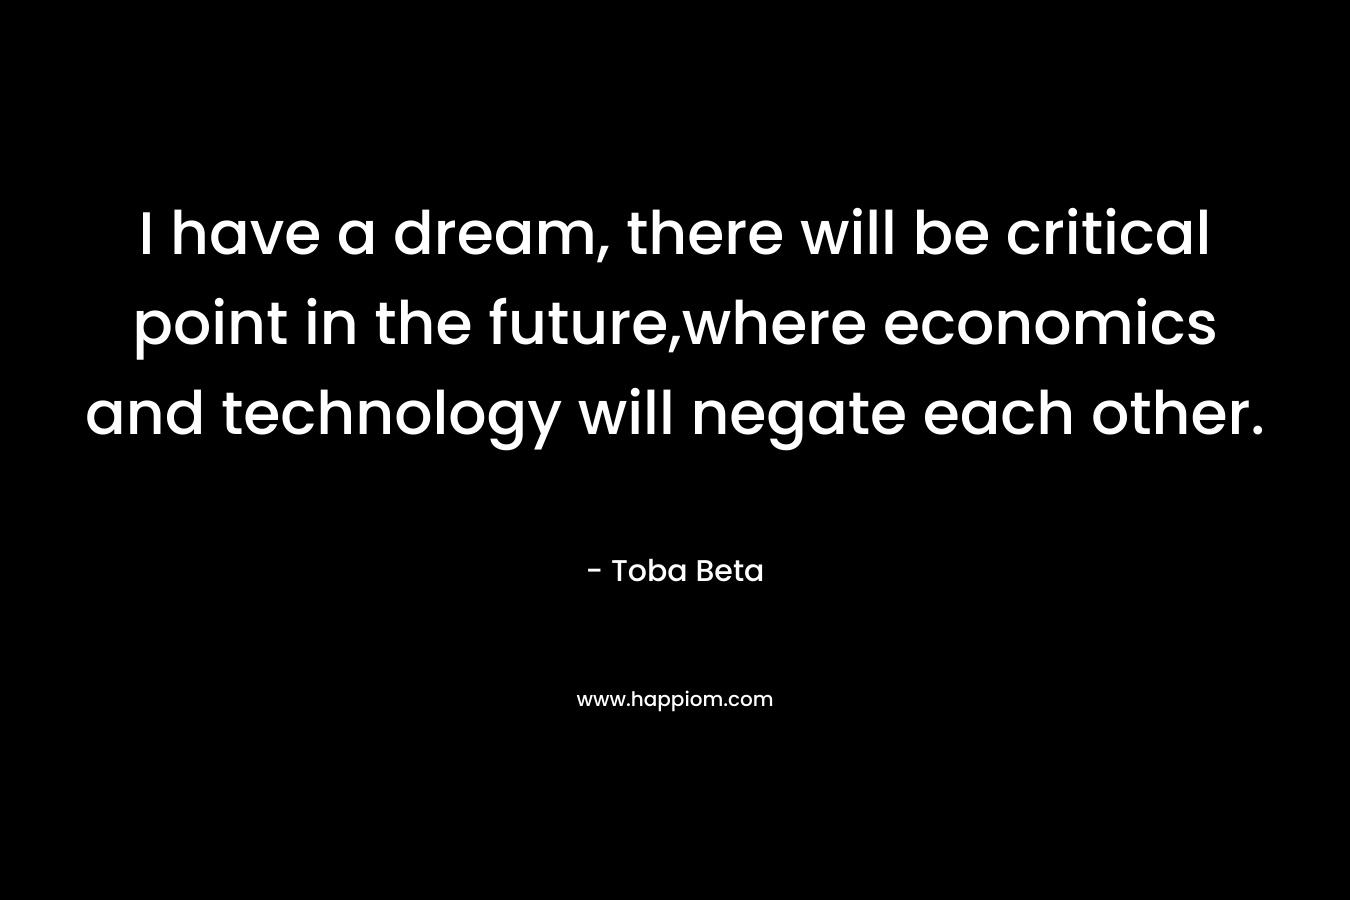 I have a dream, there will be critical point in the future,where economics and technology will negate each other. – Toba Beta